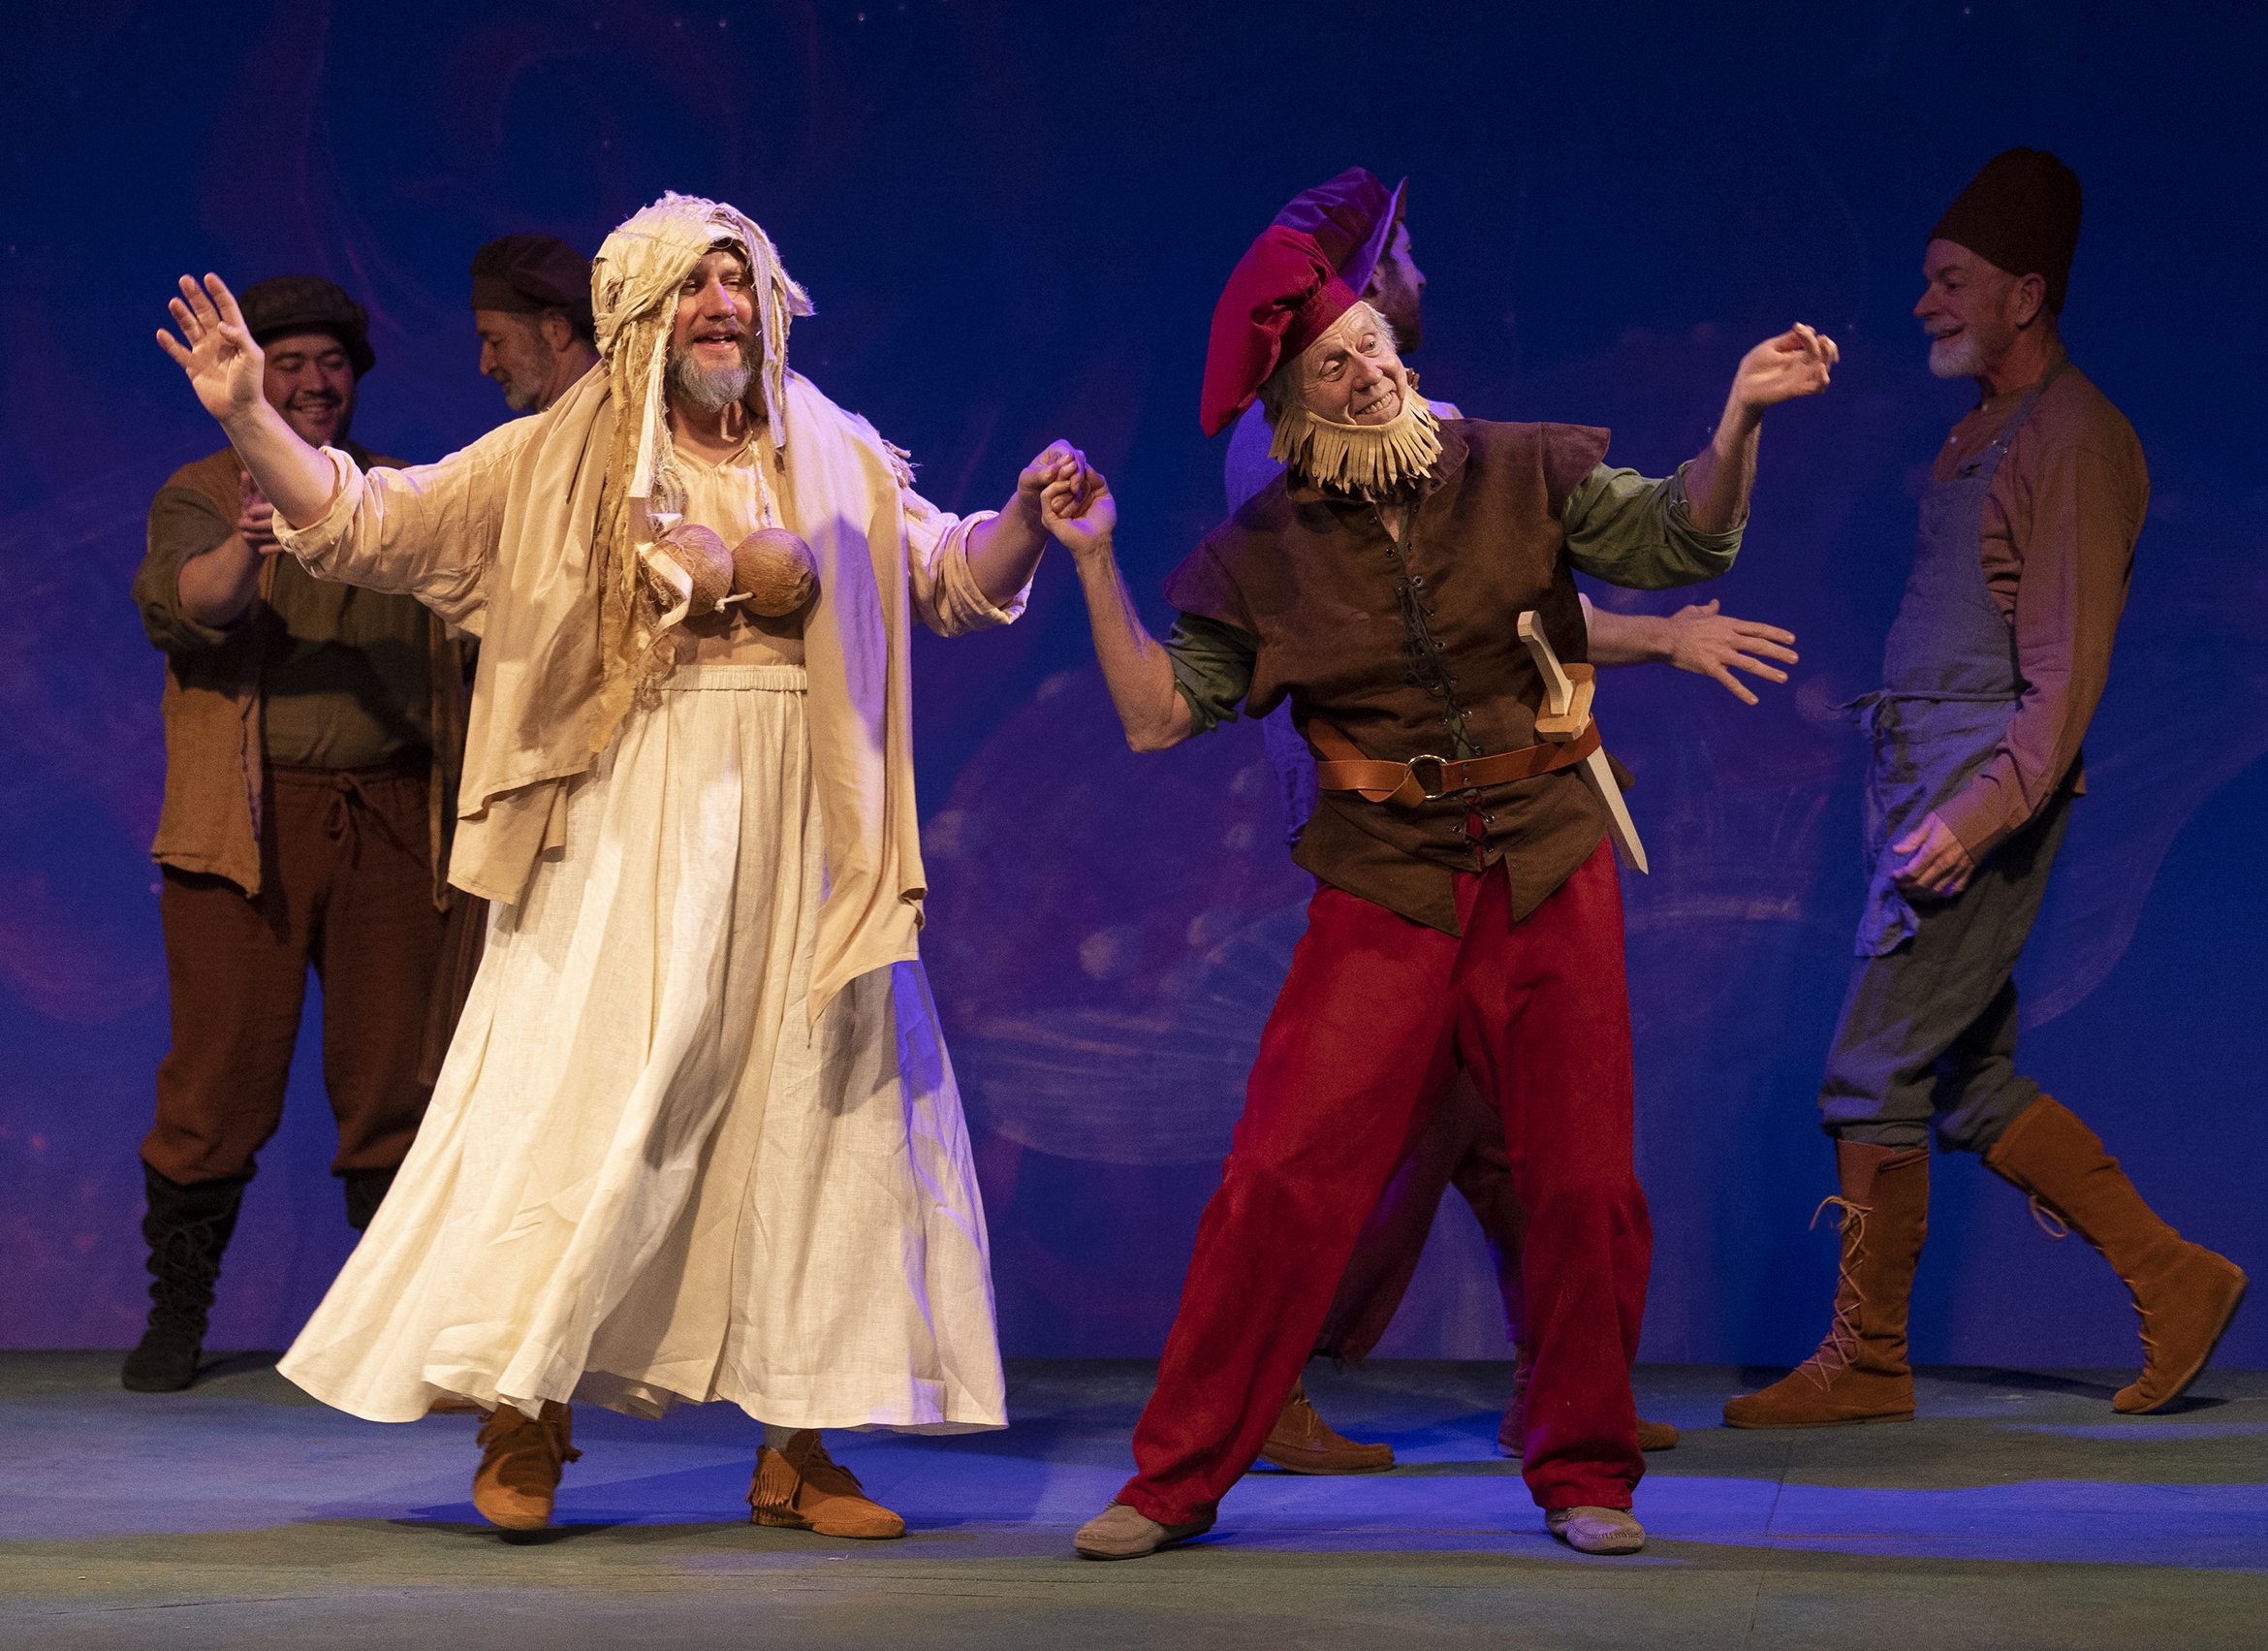 Matt Walley as Francis Flute and Joseph McGrath as Nick Bottom portraying Thisbe and Pyramus. Photo by Tim Fuller.